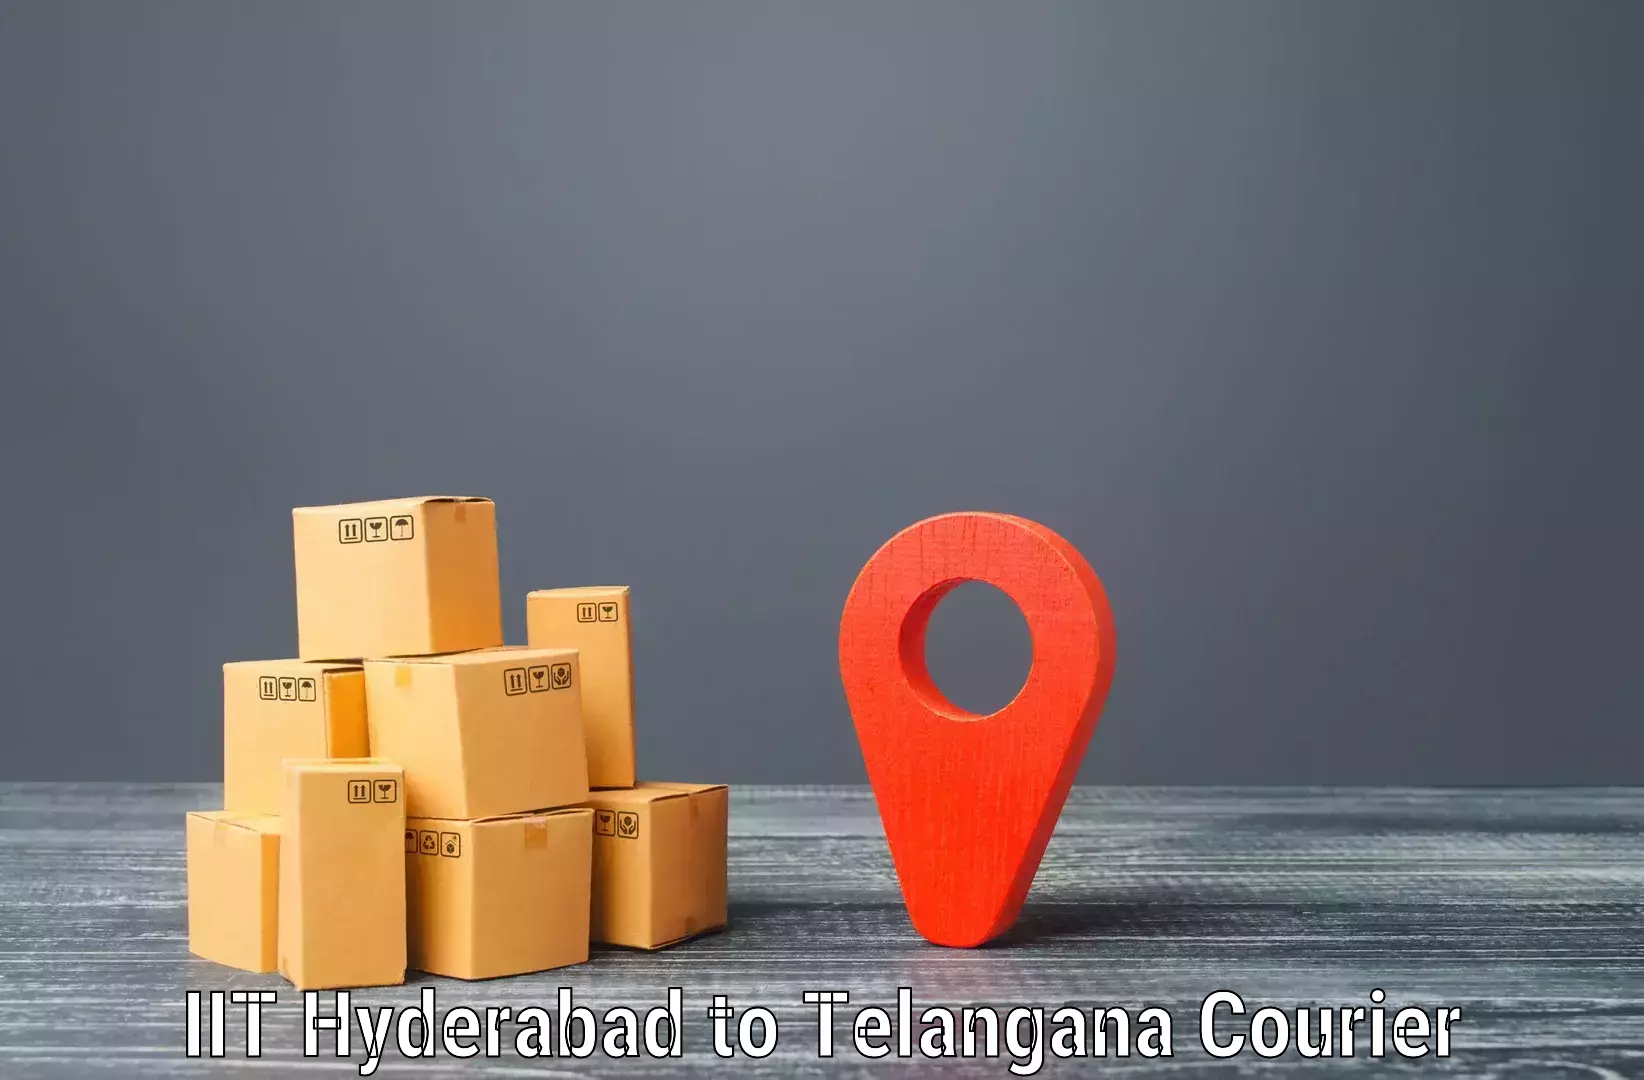 Professional courier services IIT Hyderabad to Zahirabad